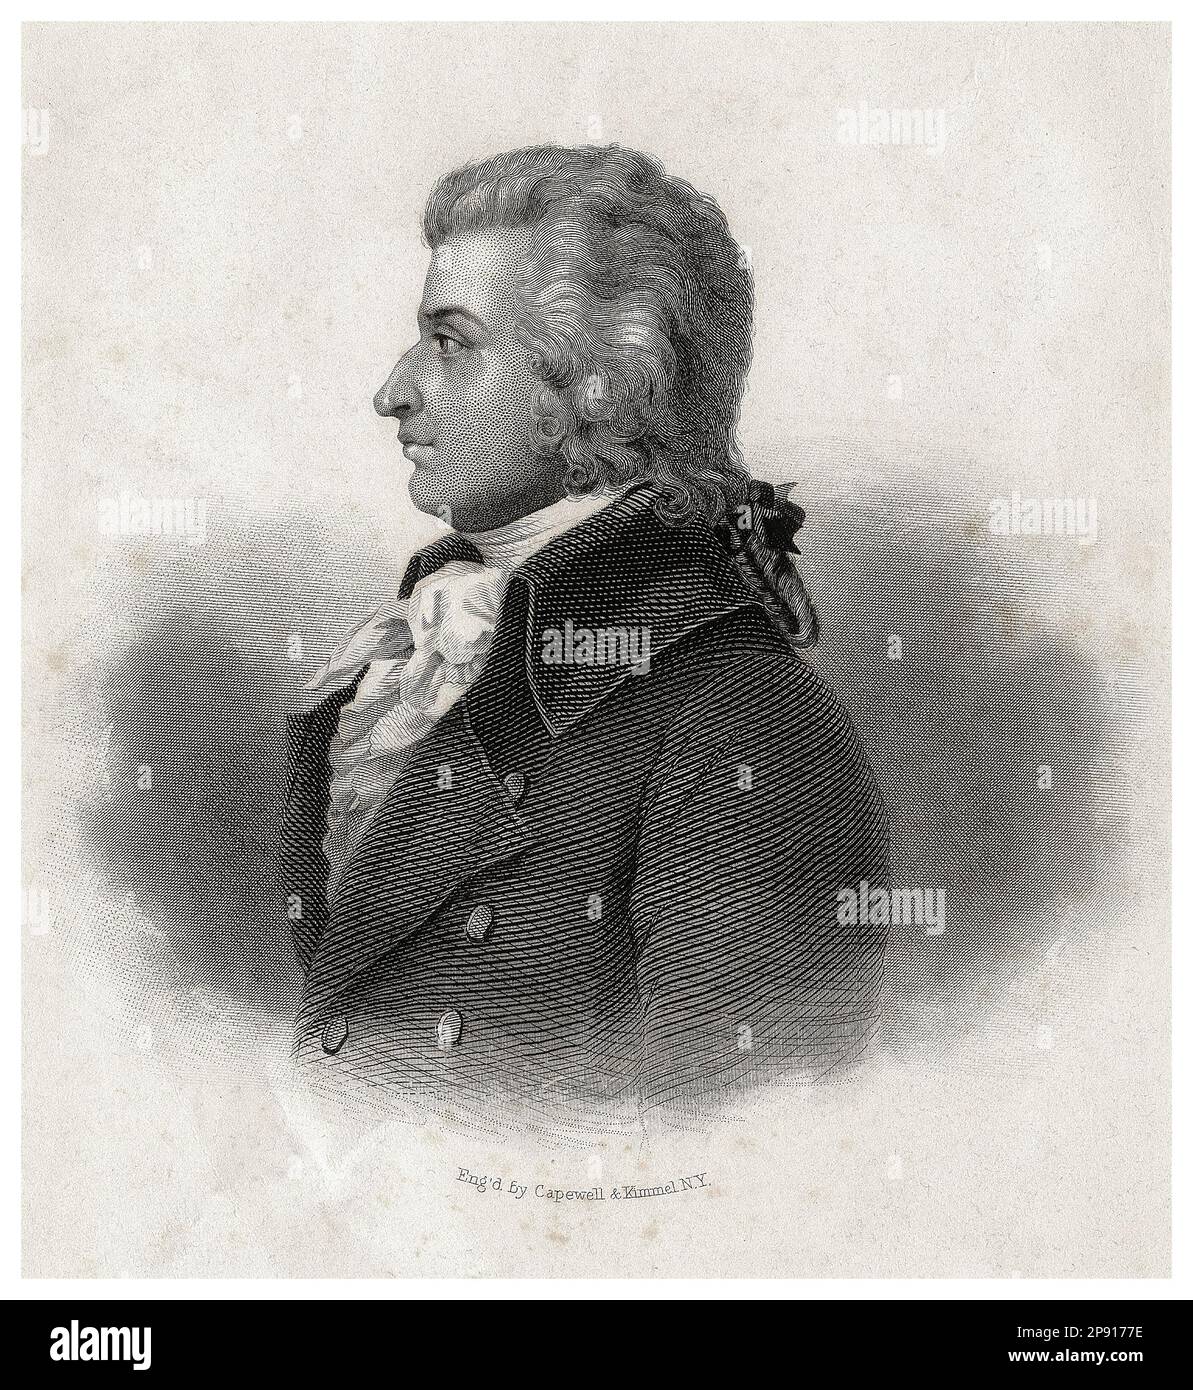 Wolfgang Amadeus Mozart (1756-1791), Composer, portrait engraving by Capewell & Kimmell, 1850-1869 Stock Photo